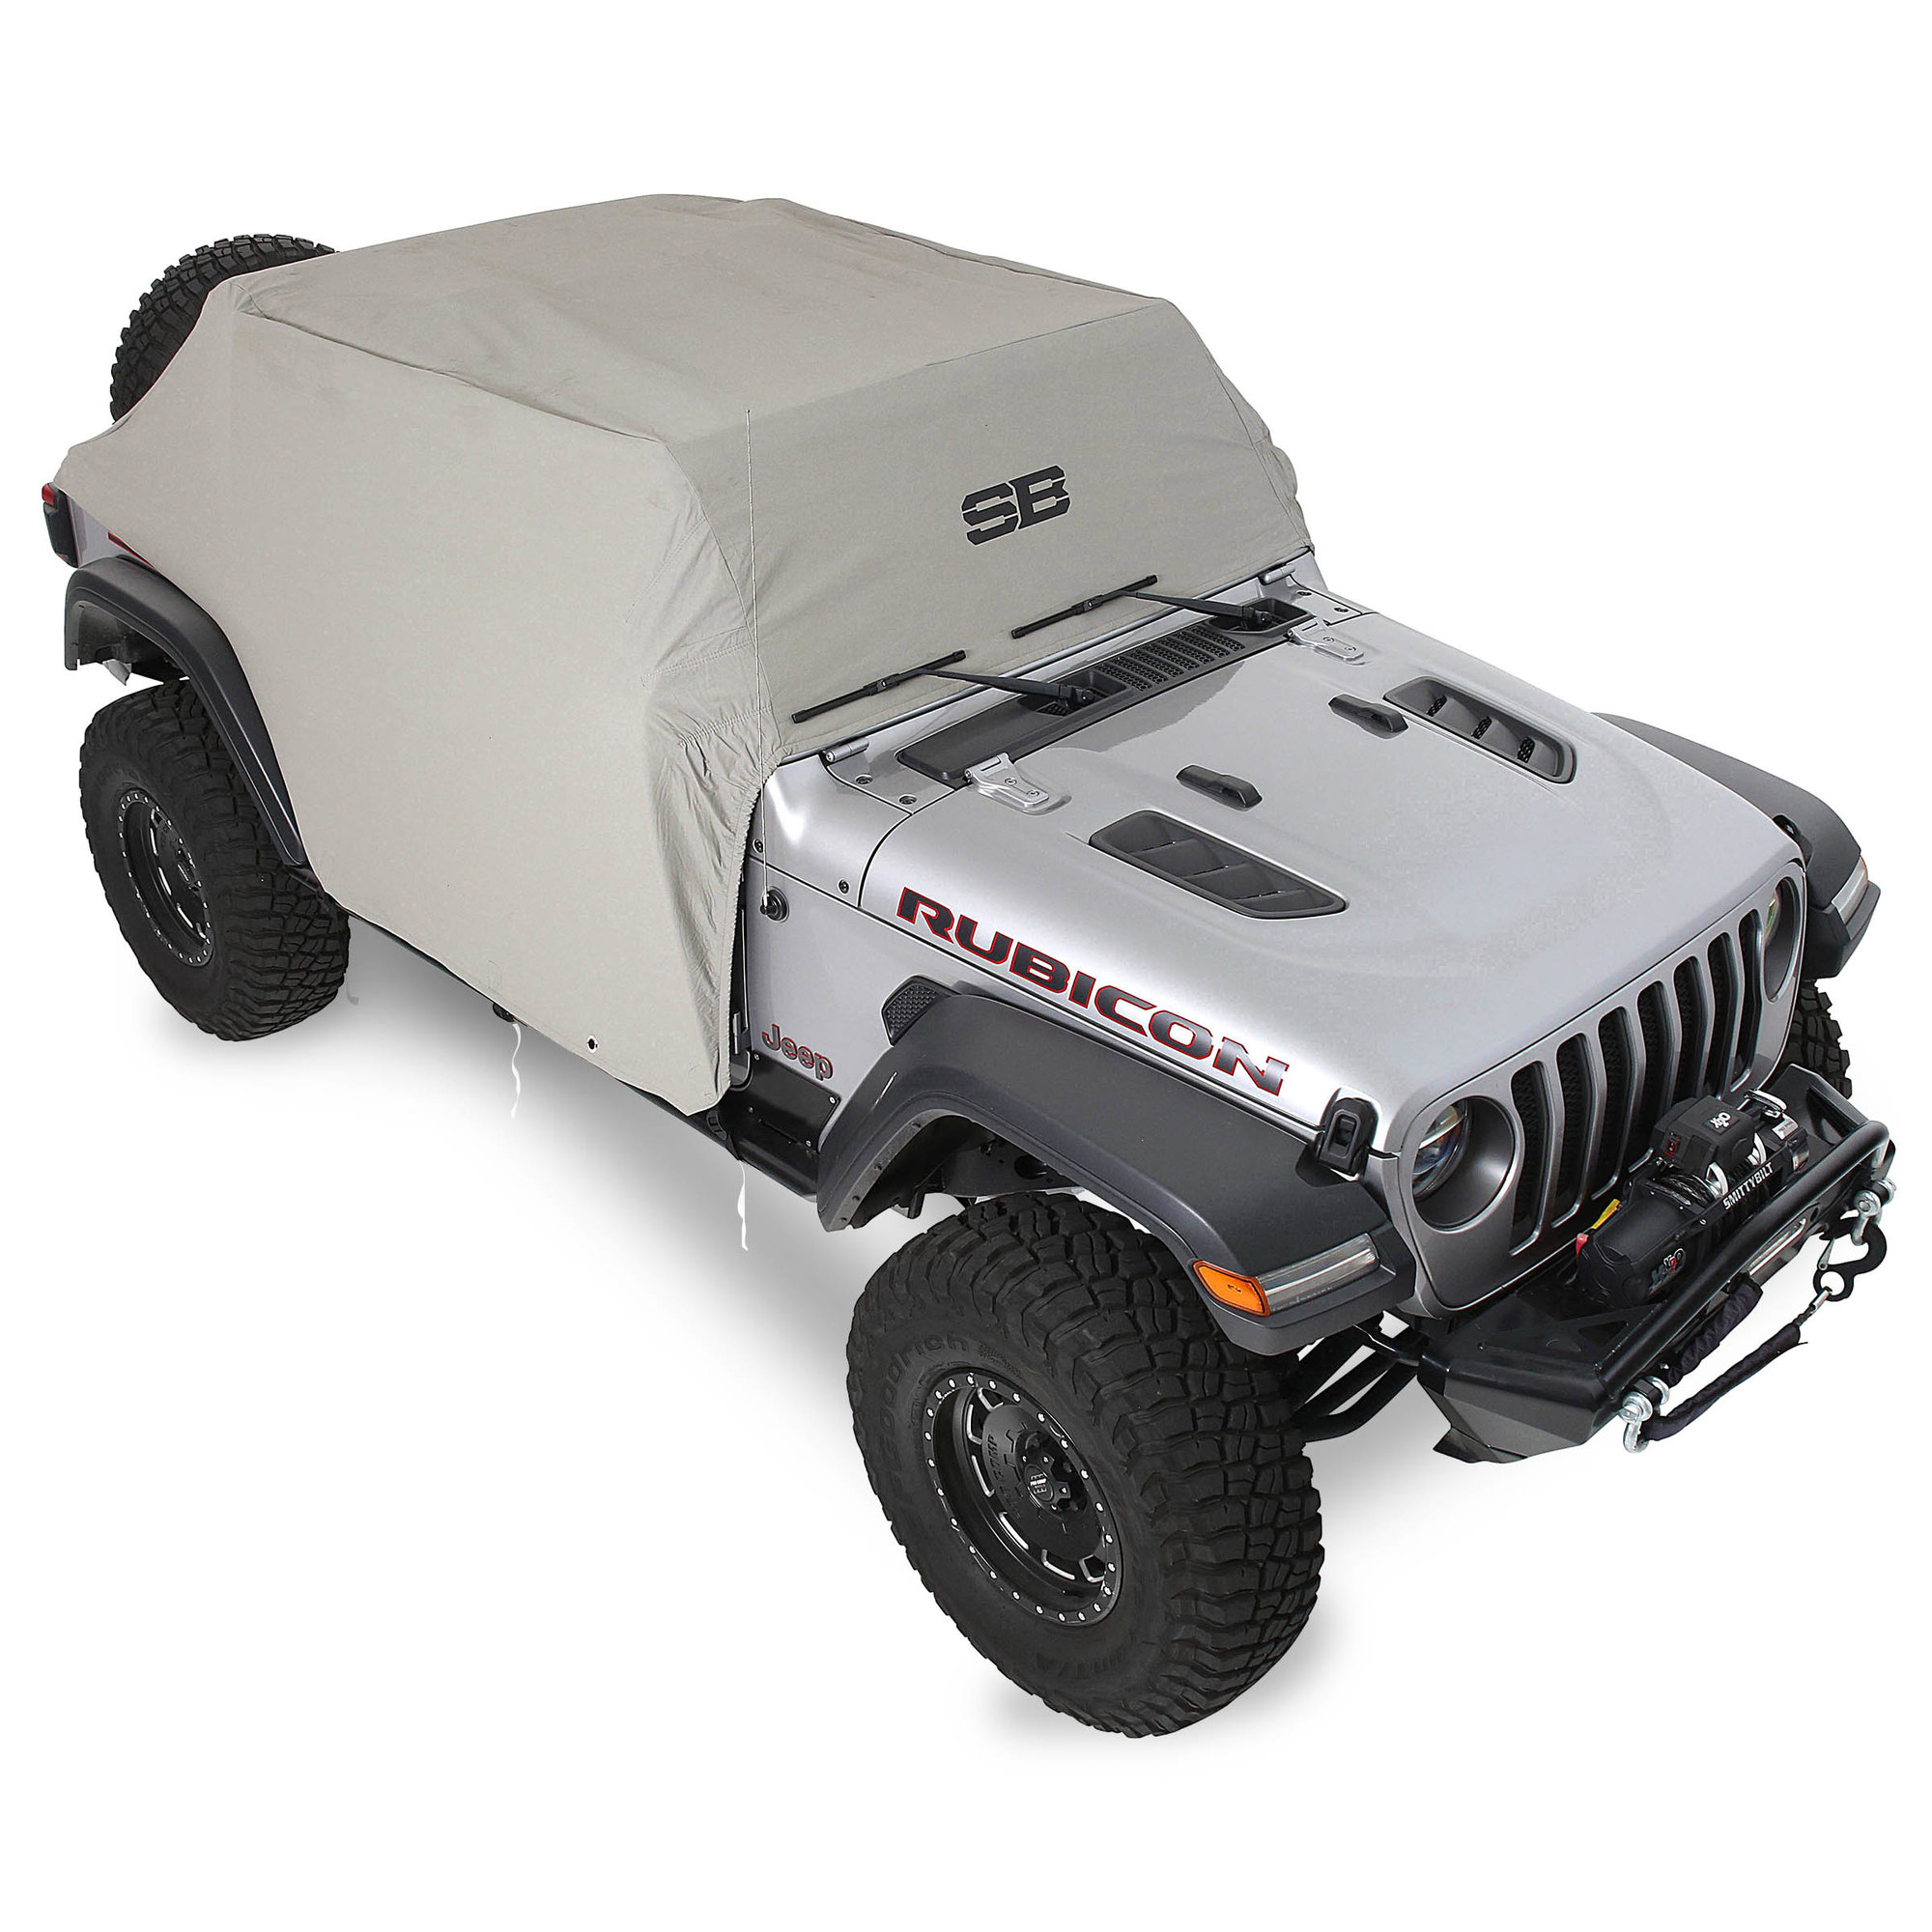 Smittybilt 1071 Cab Cover for 18-23 Jeep Wrangler JL Unlimited | Quadratec